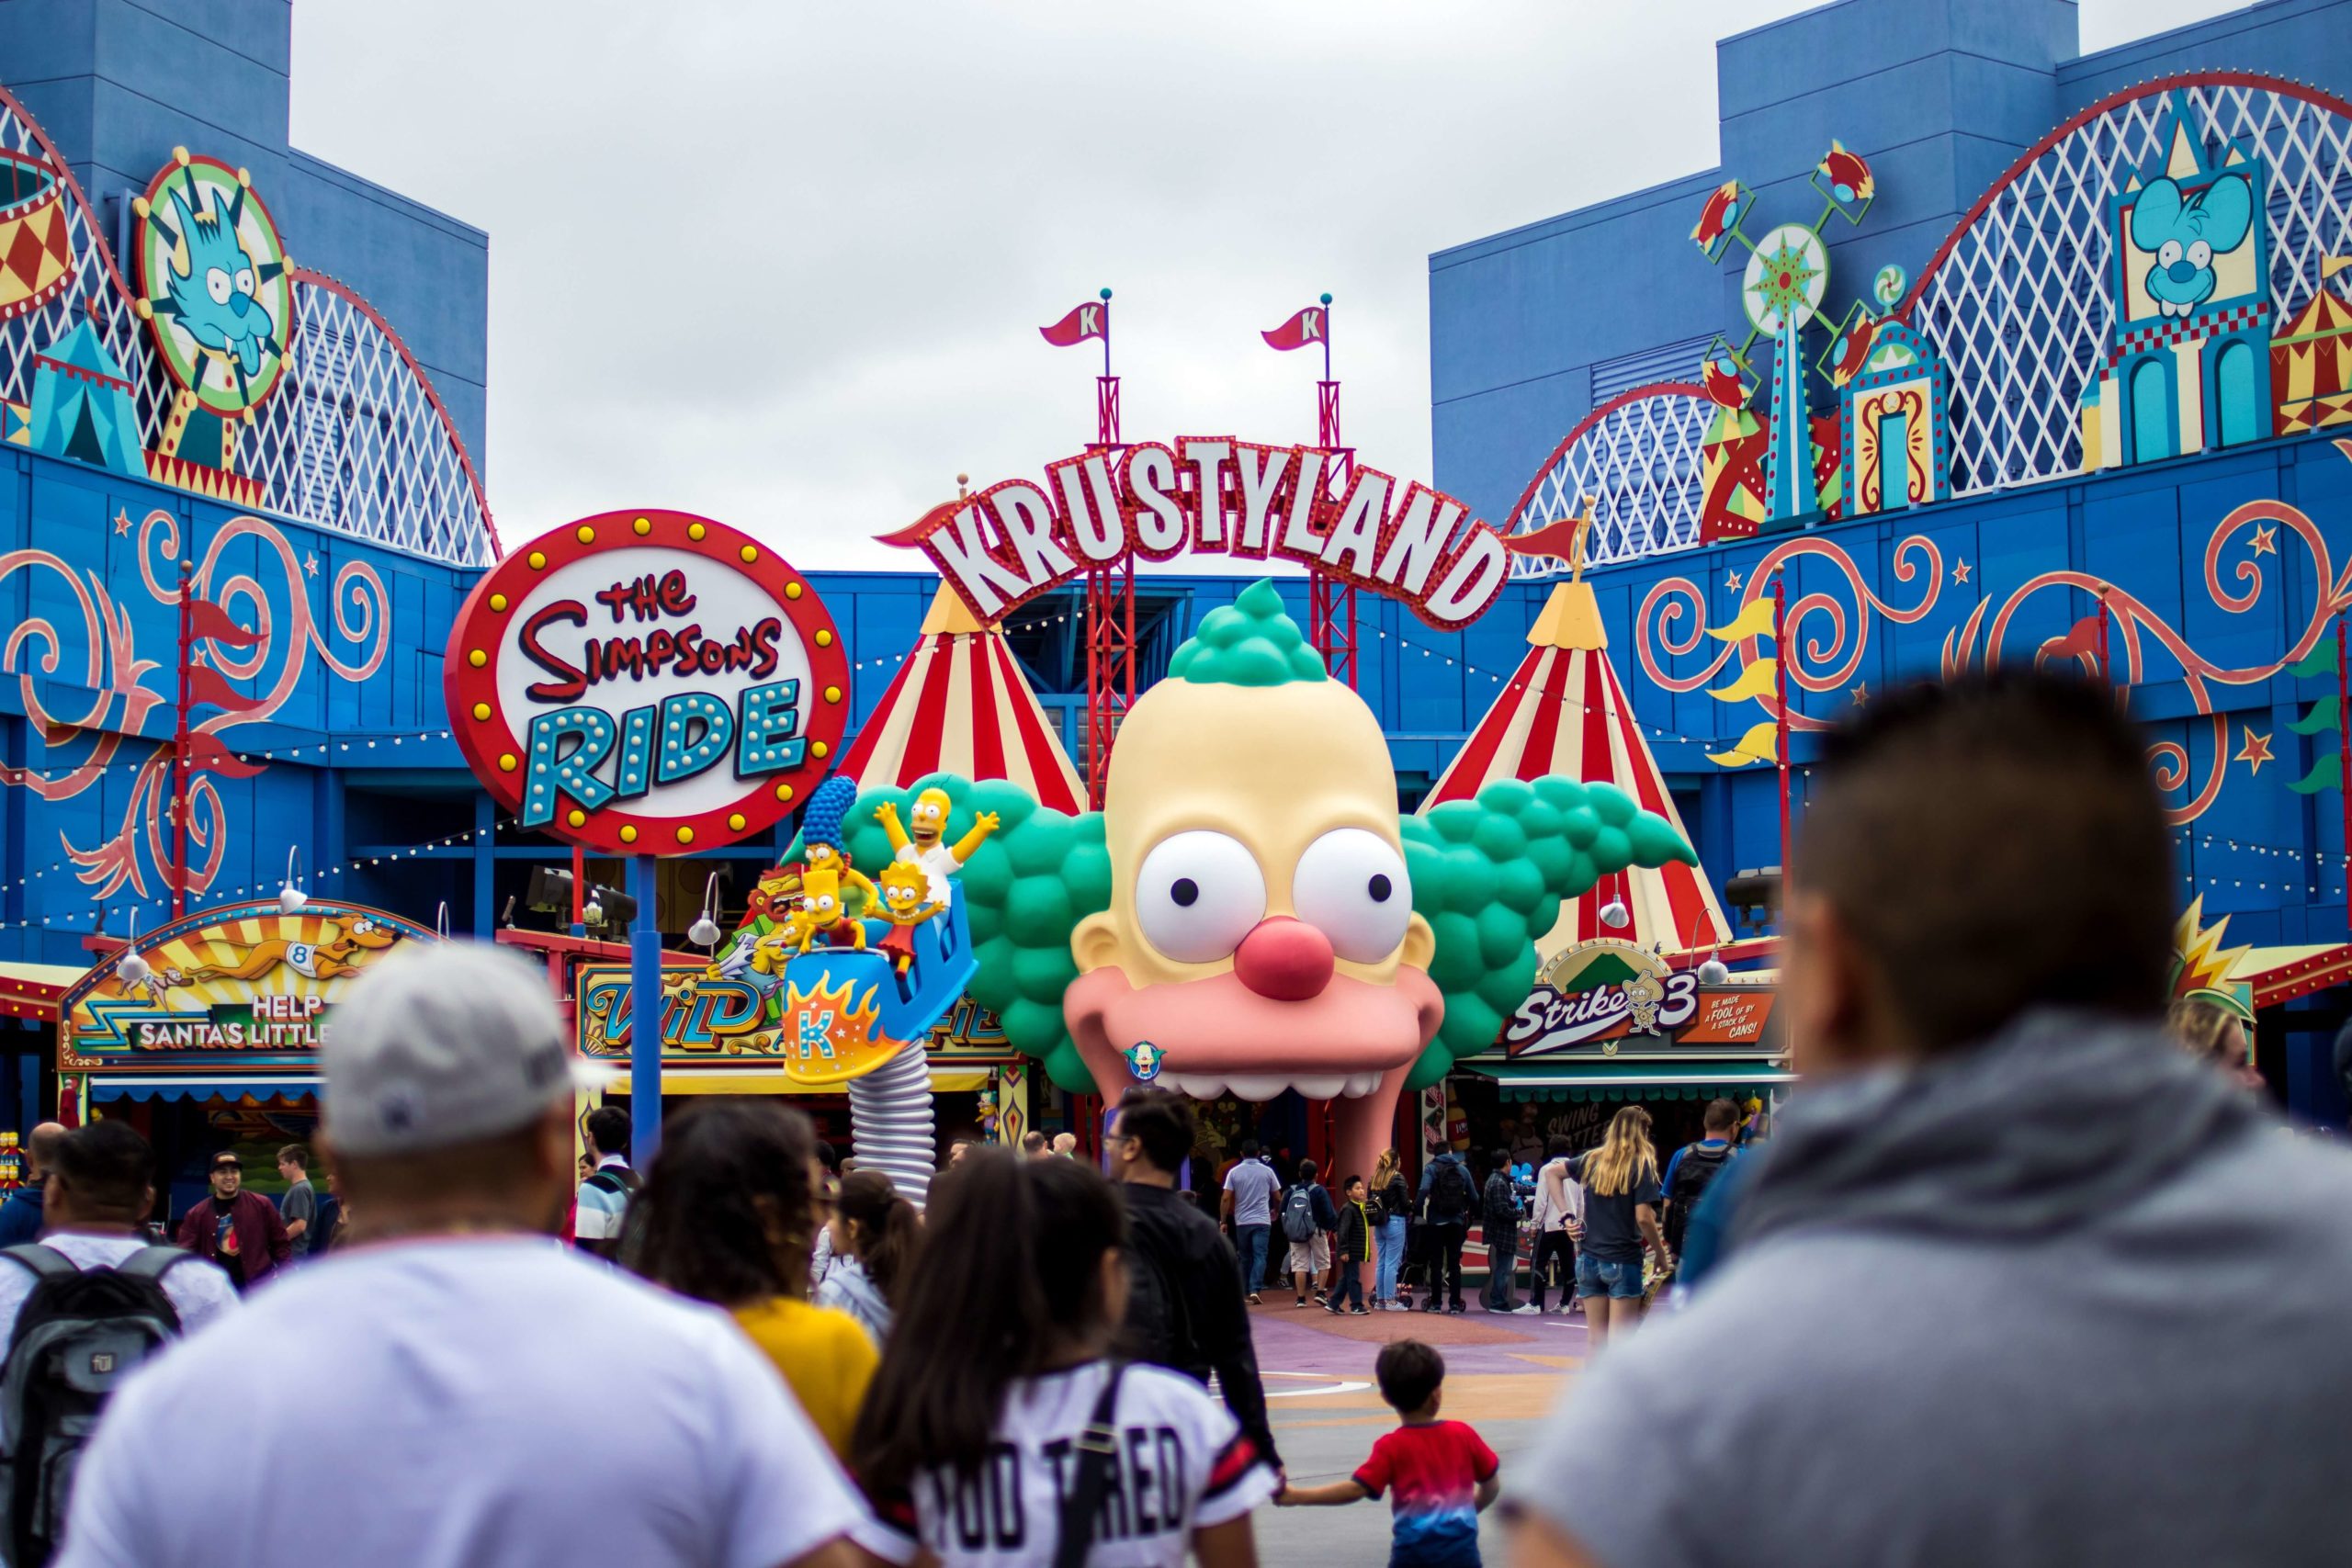 Picture of The Simpsons featured in Universal, as Disney owns The Simpsons but not the theme park rights.